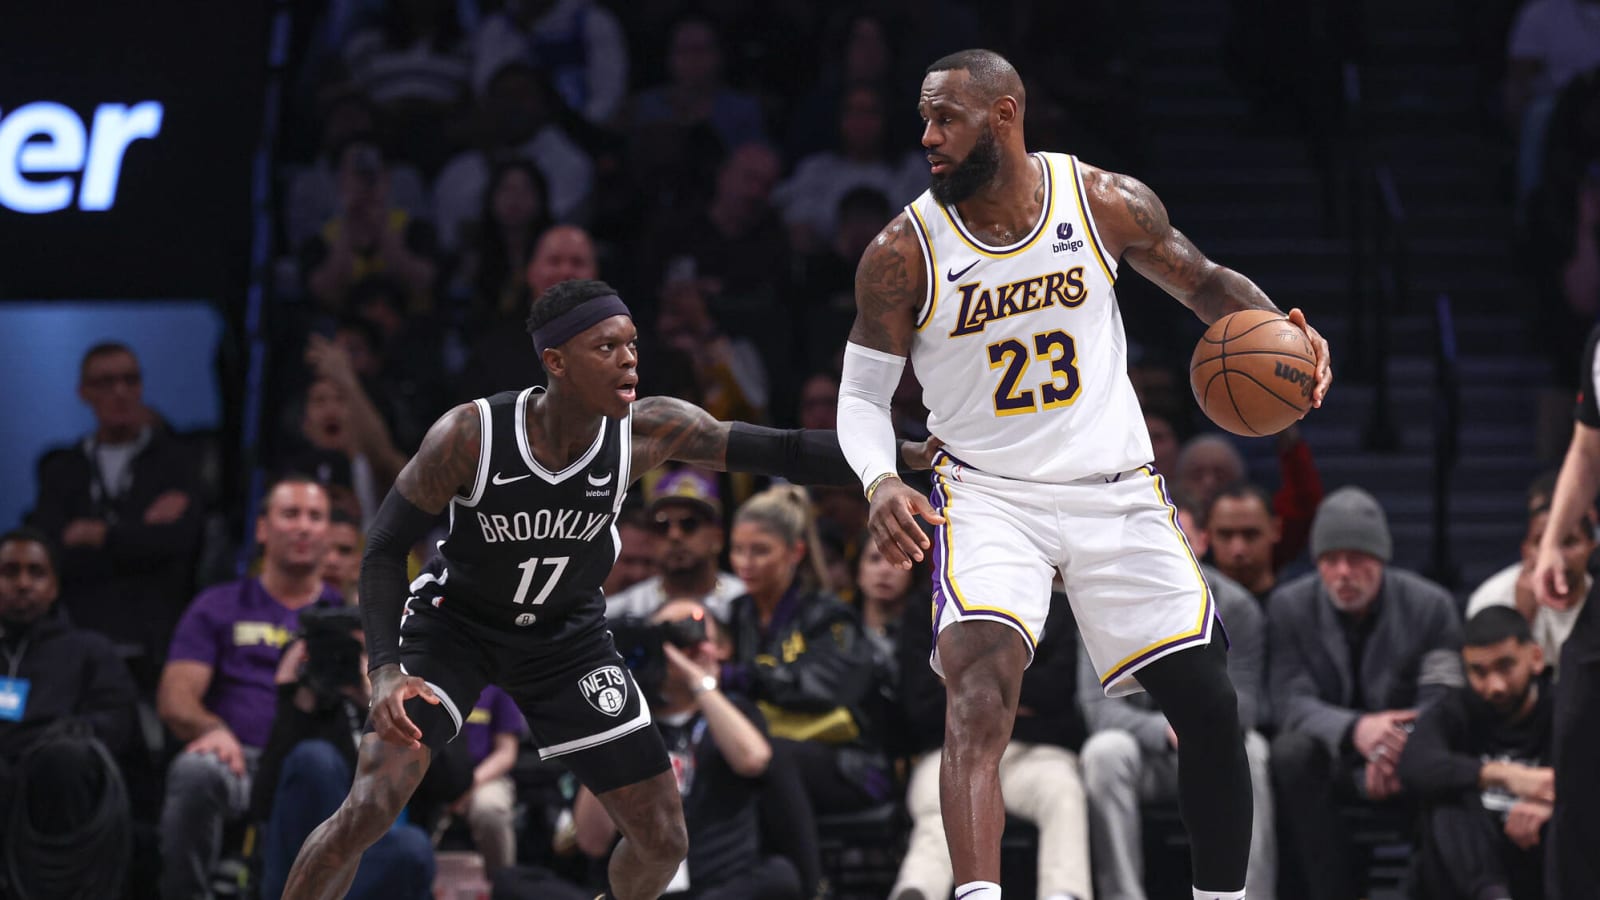 LeBron James Ties Career-High 9 3-Pointers In Win vs. Nets; Passes Michael Jordan For Most 30+ games in NBA History